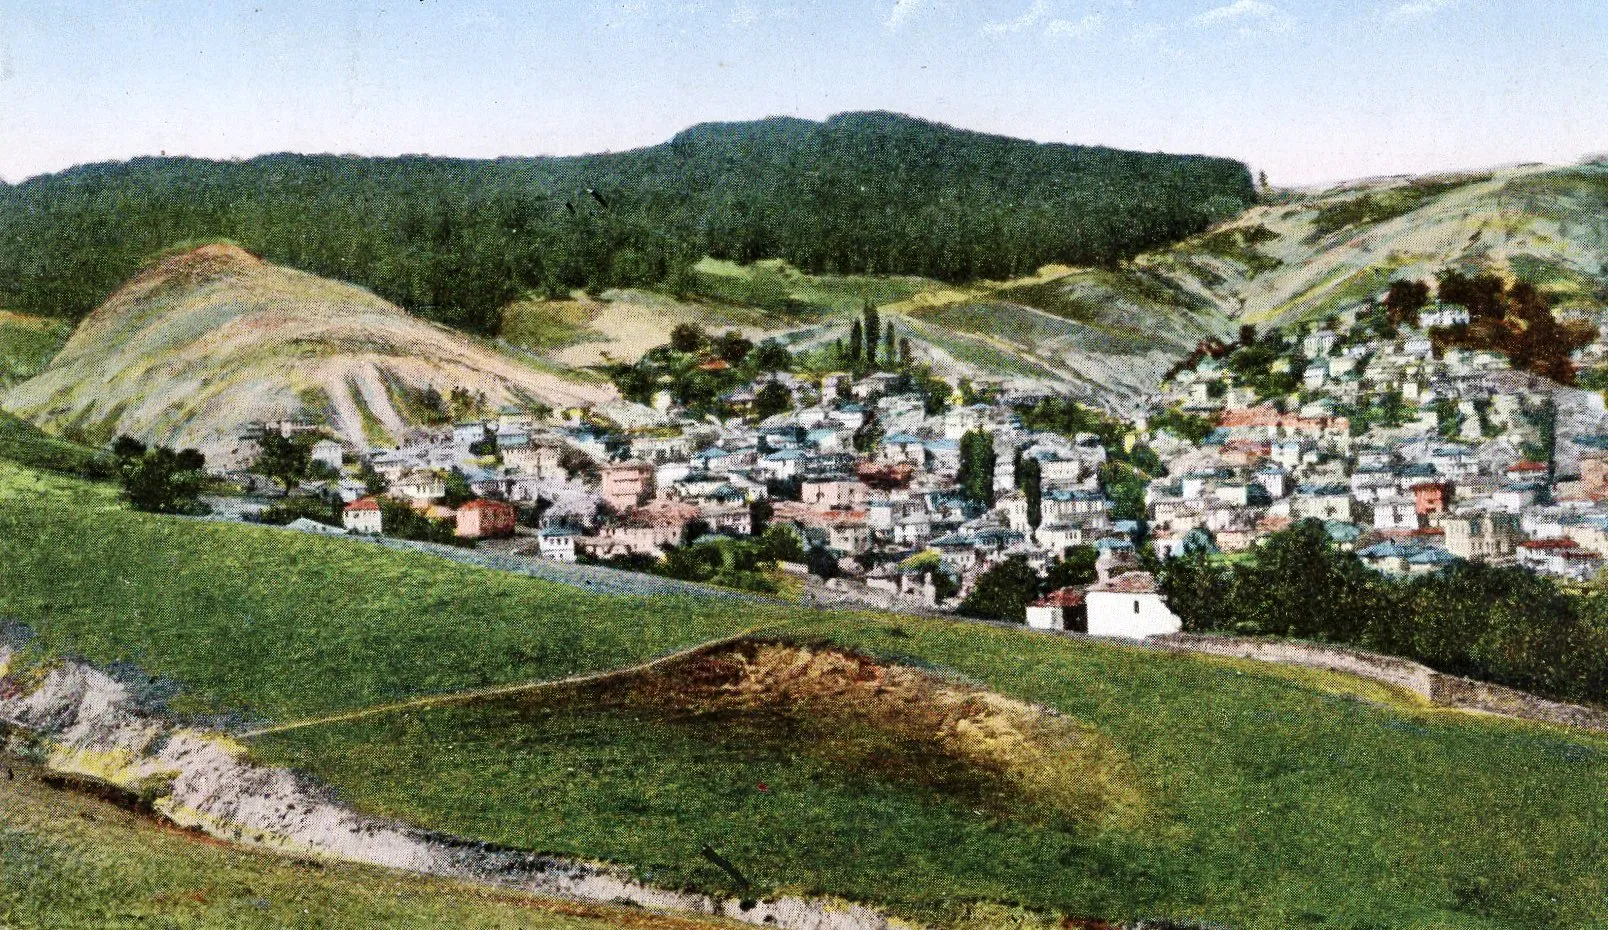 Photo showing: Postcard from Krusevo from 1920s

This media file is produced by Wikipedian in Residence in Category:Wikipedian in Residence at DARM in 2016.